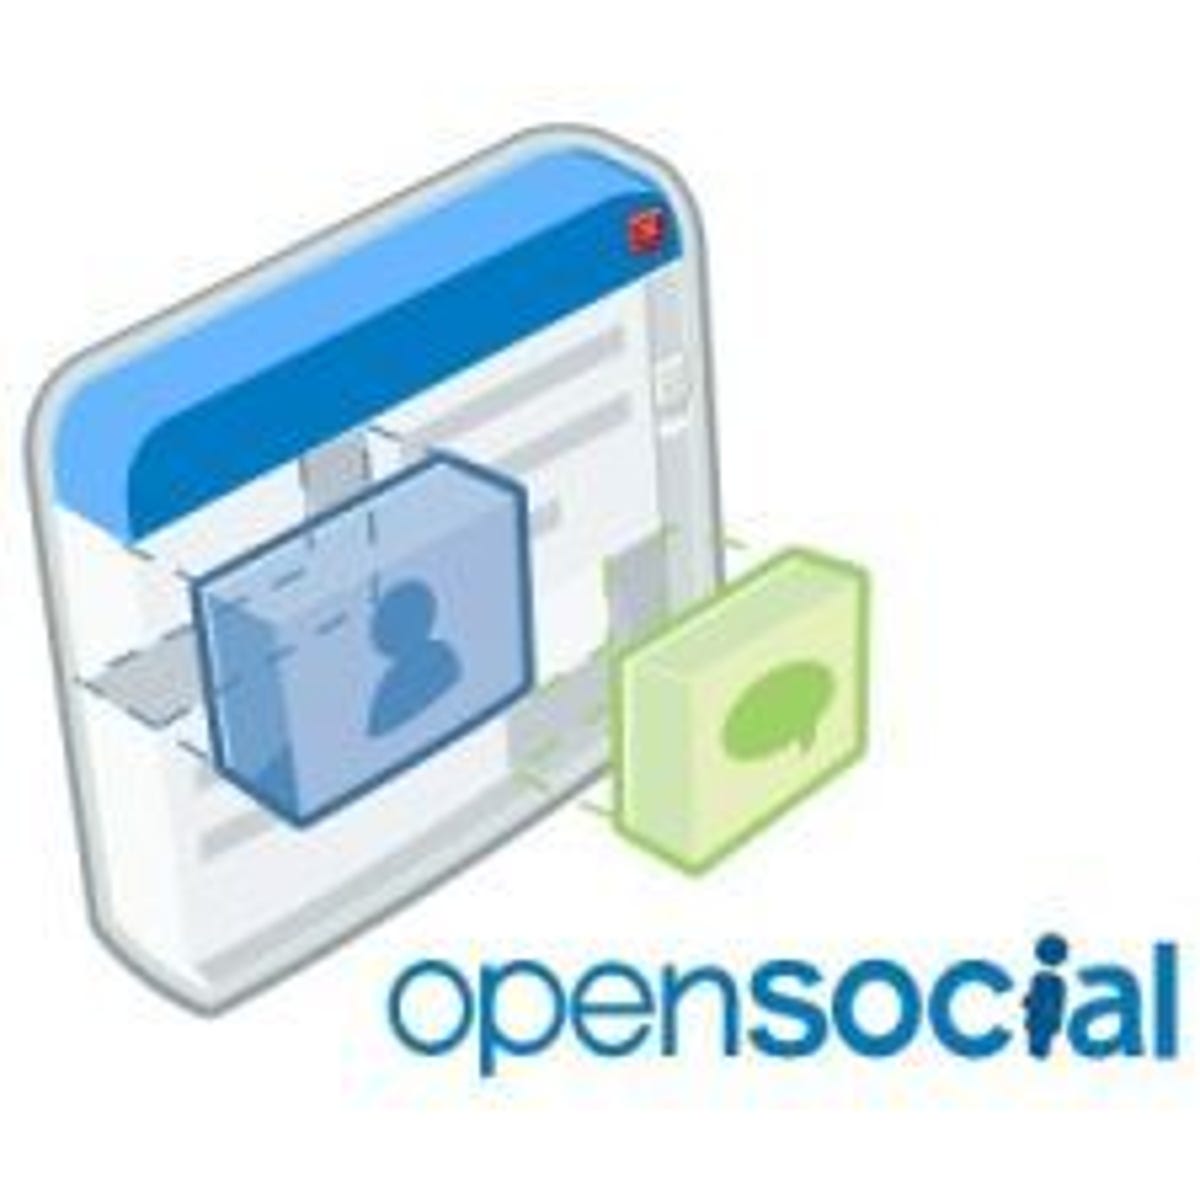 Projects like OpenSocial haven't been met with a lot of developer enthusiasm, either.